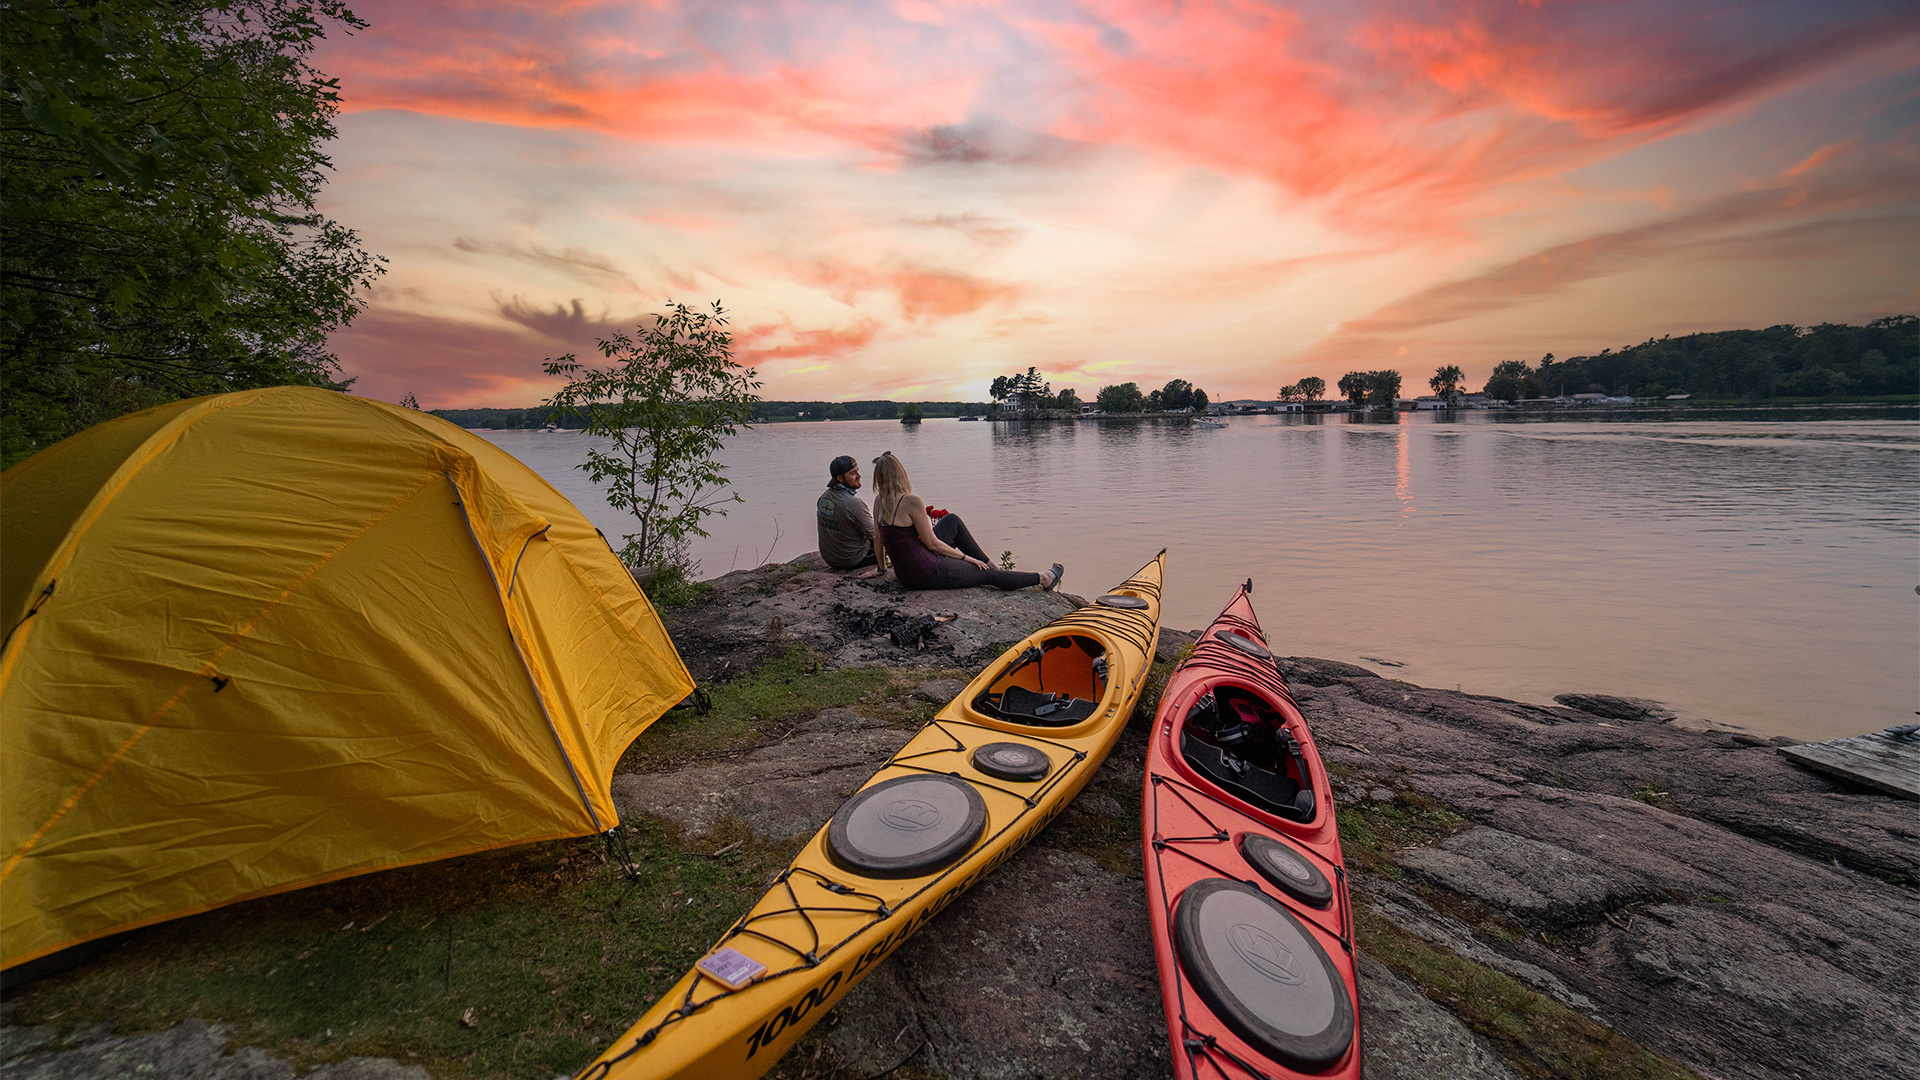 Kayaking: Couple resting during an extended recreational water trip to Thousand Islands in Canada. 1920x1080 Full HD Background.